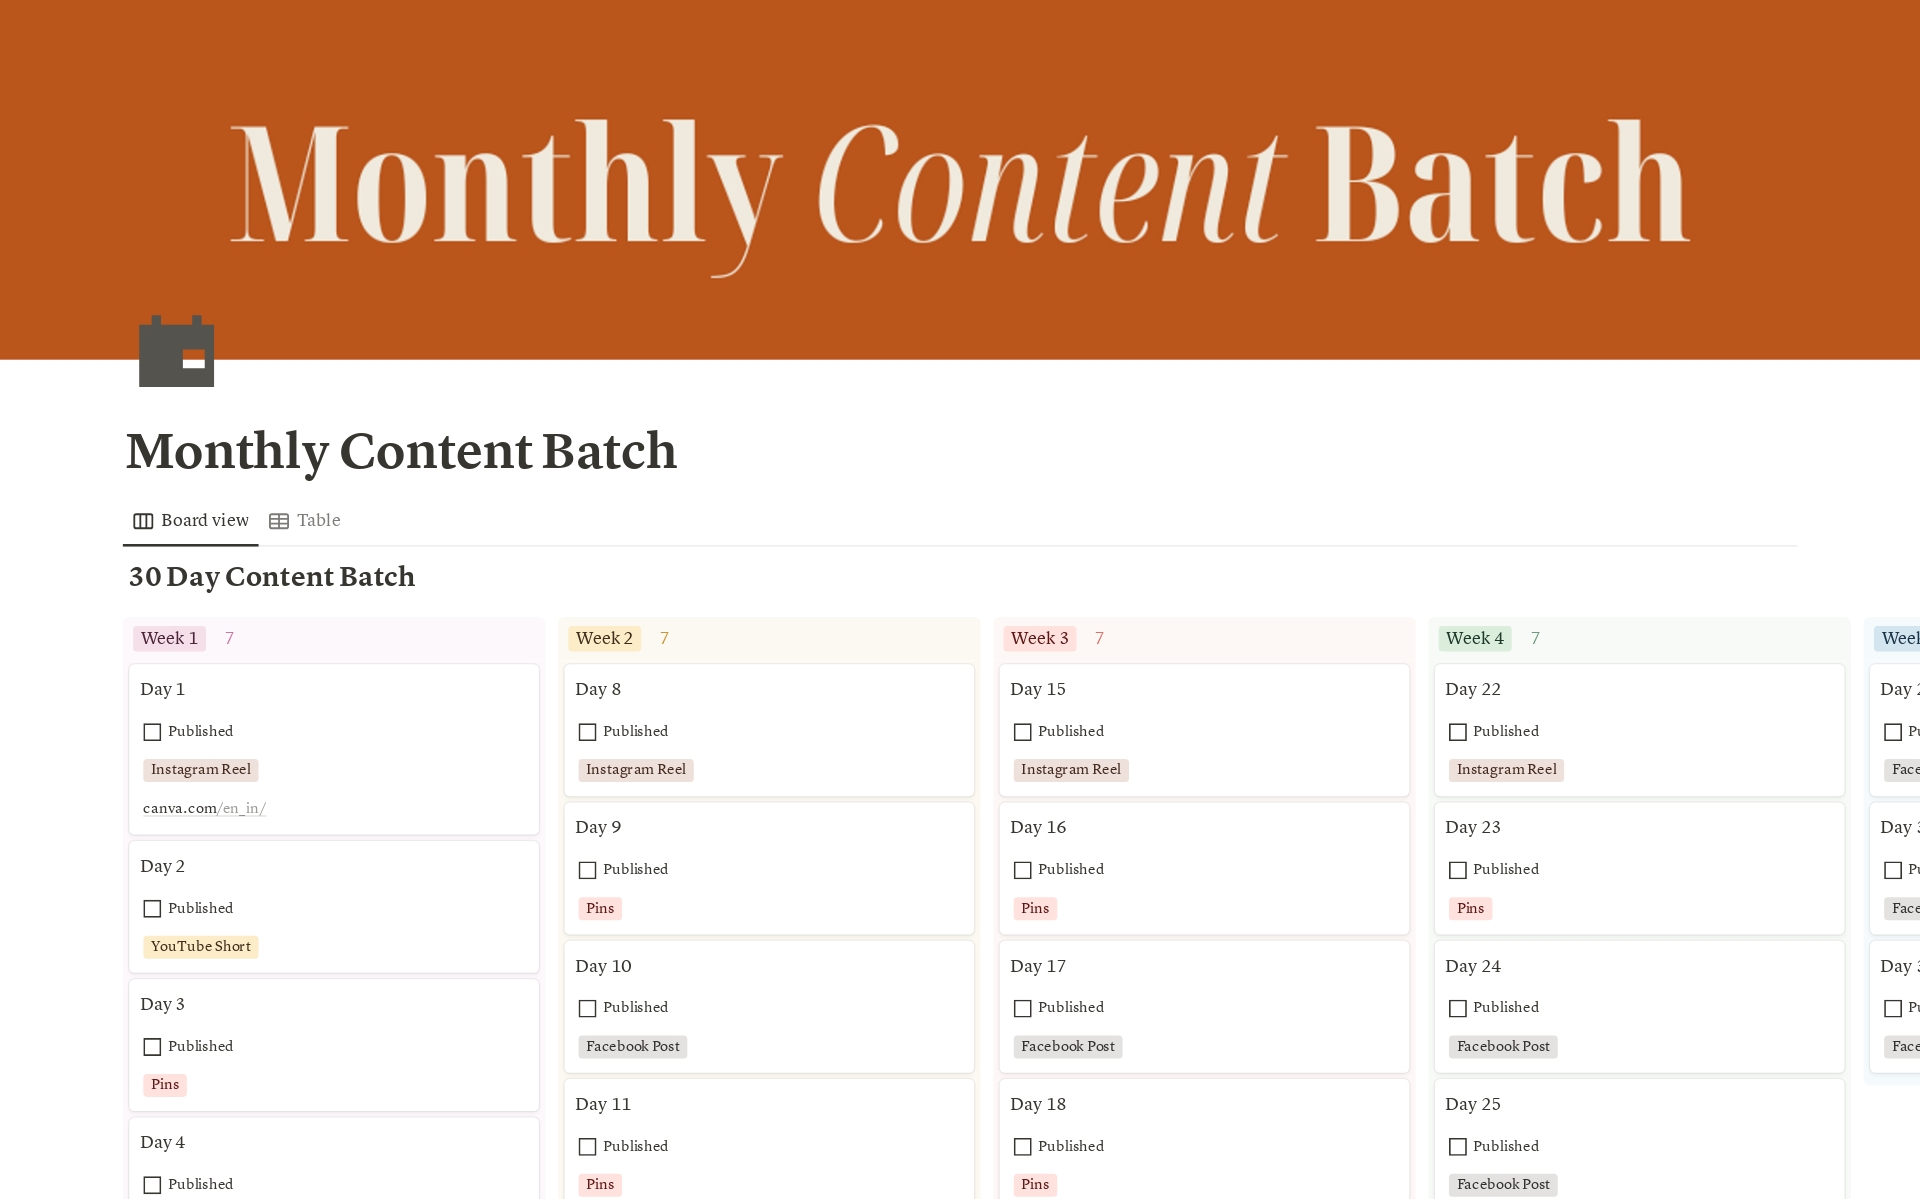 A simple kanban board that will save you time!
Get a ready-made kanban board to track your short-form content batch for a month